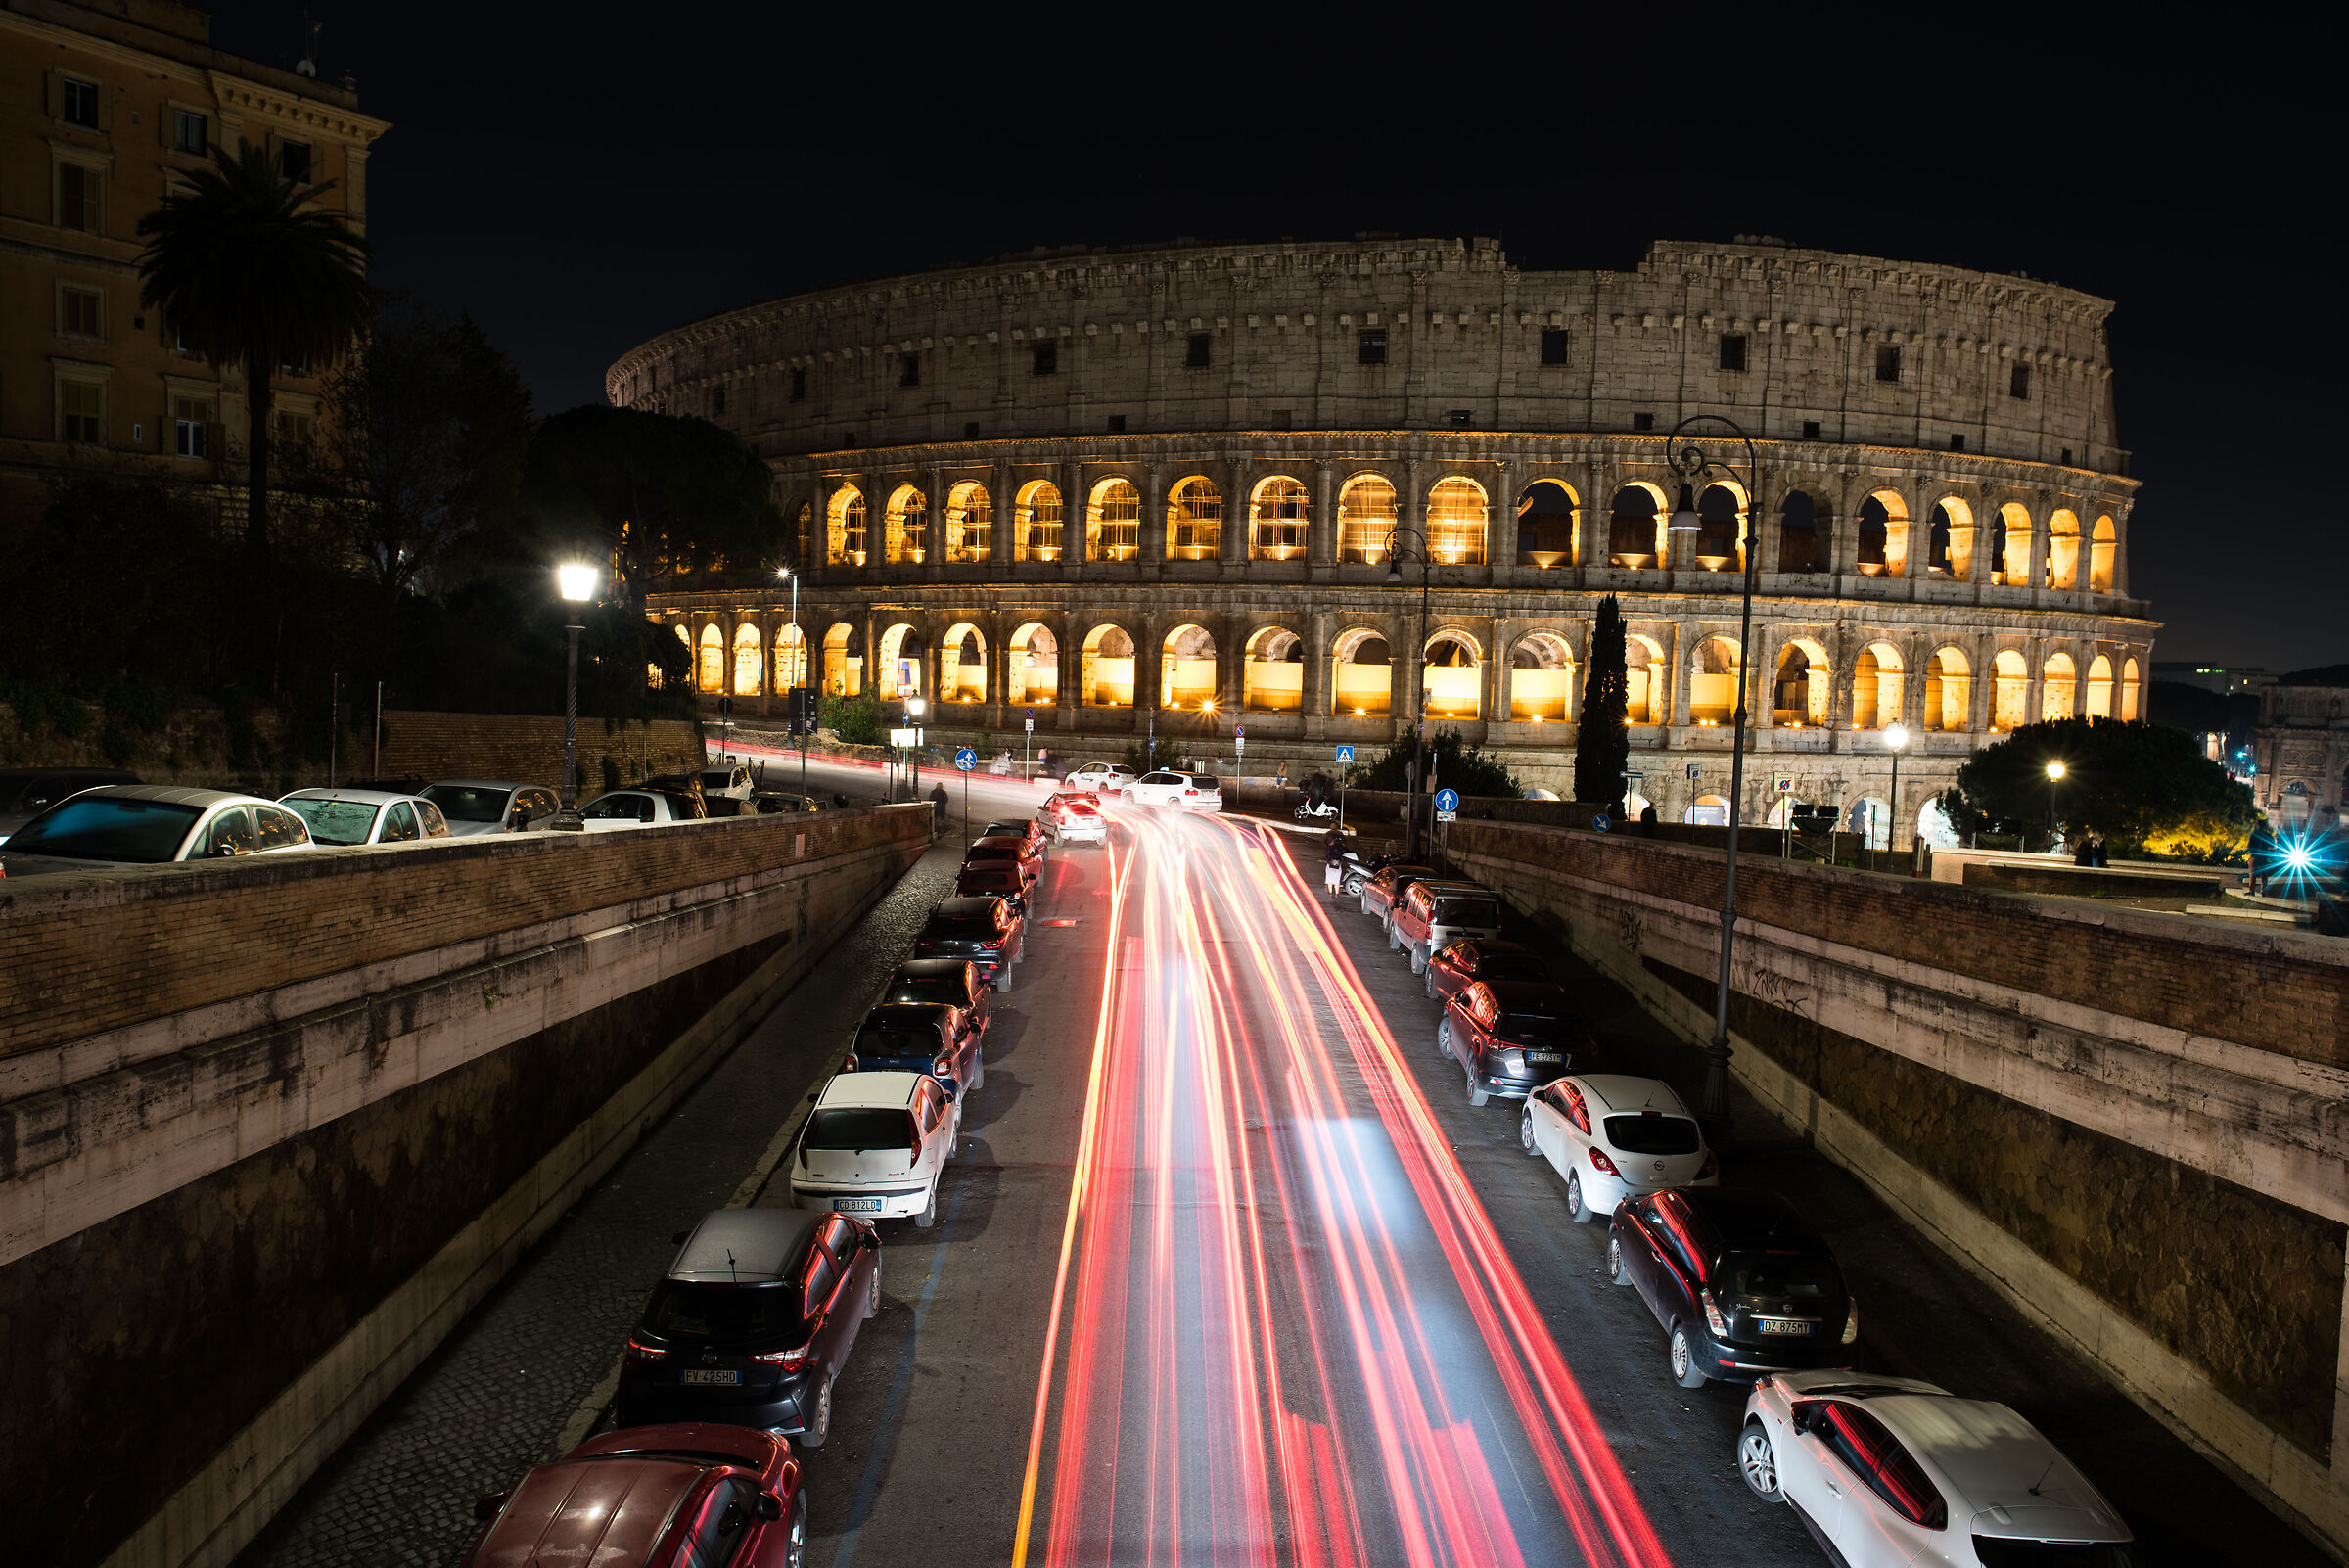 The Colosseum at night...